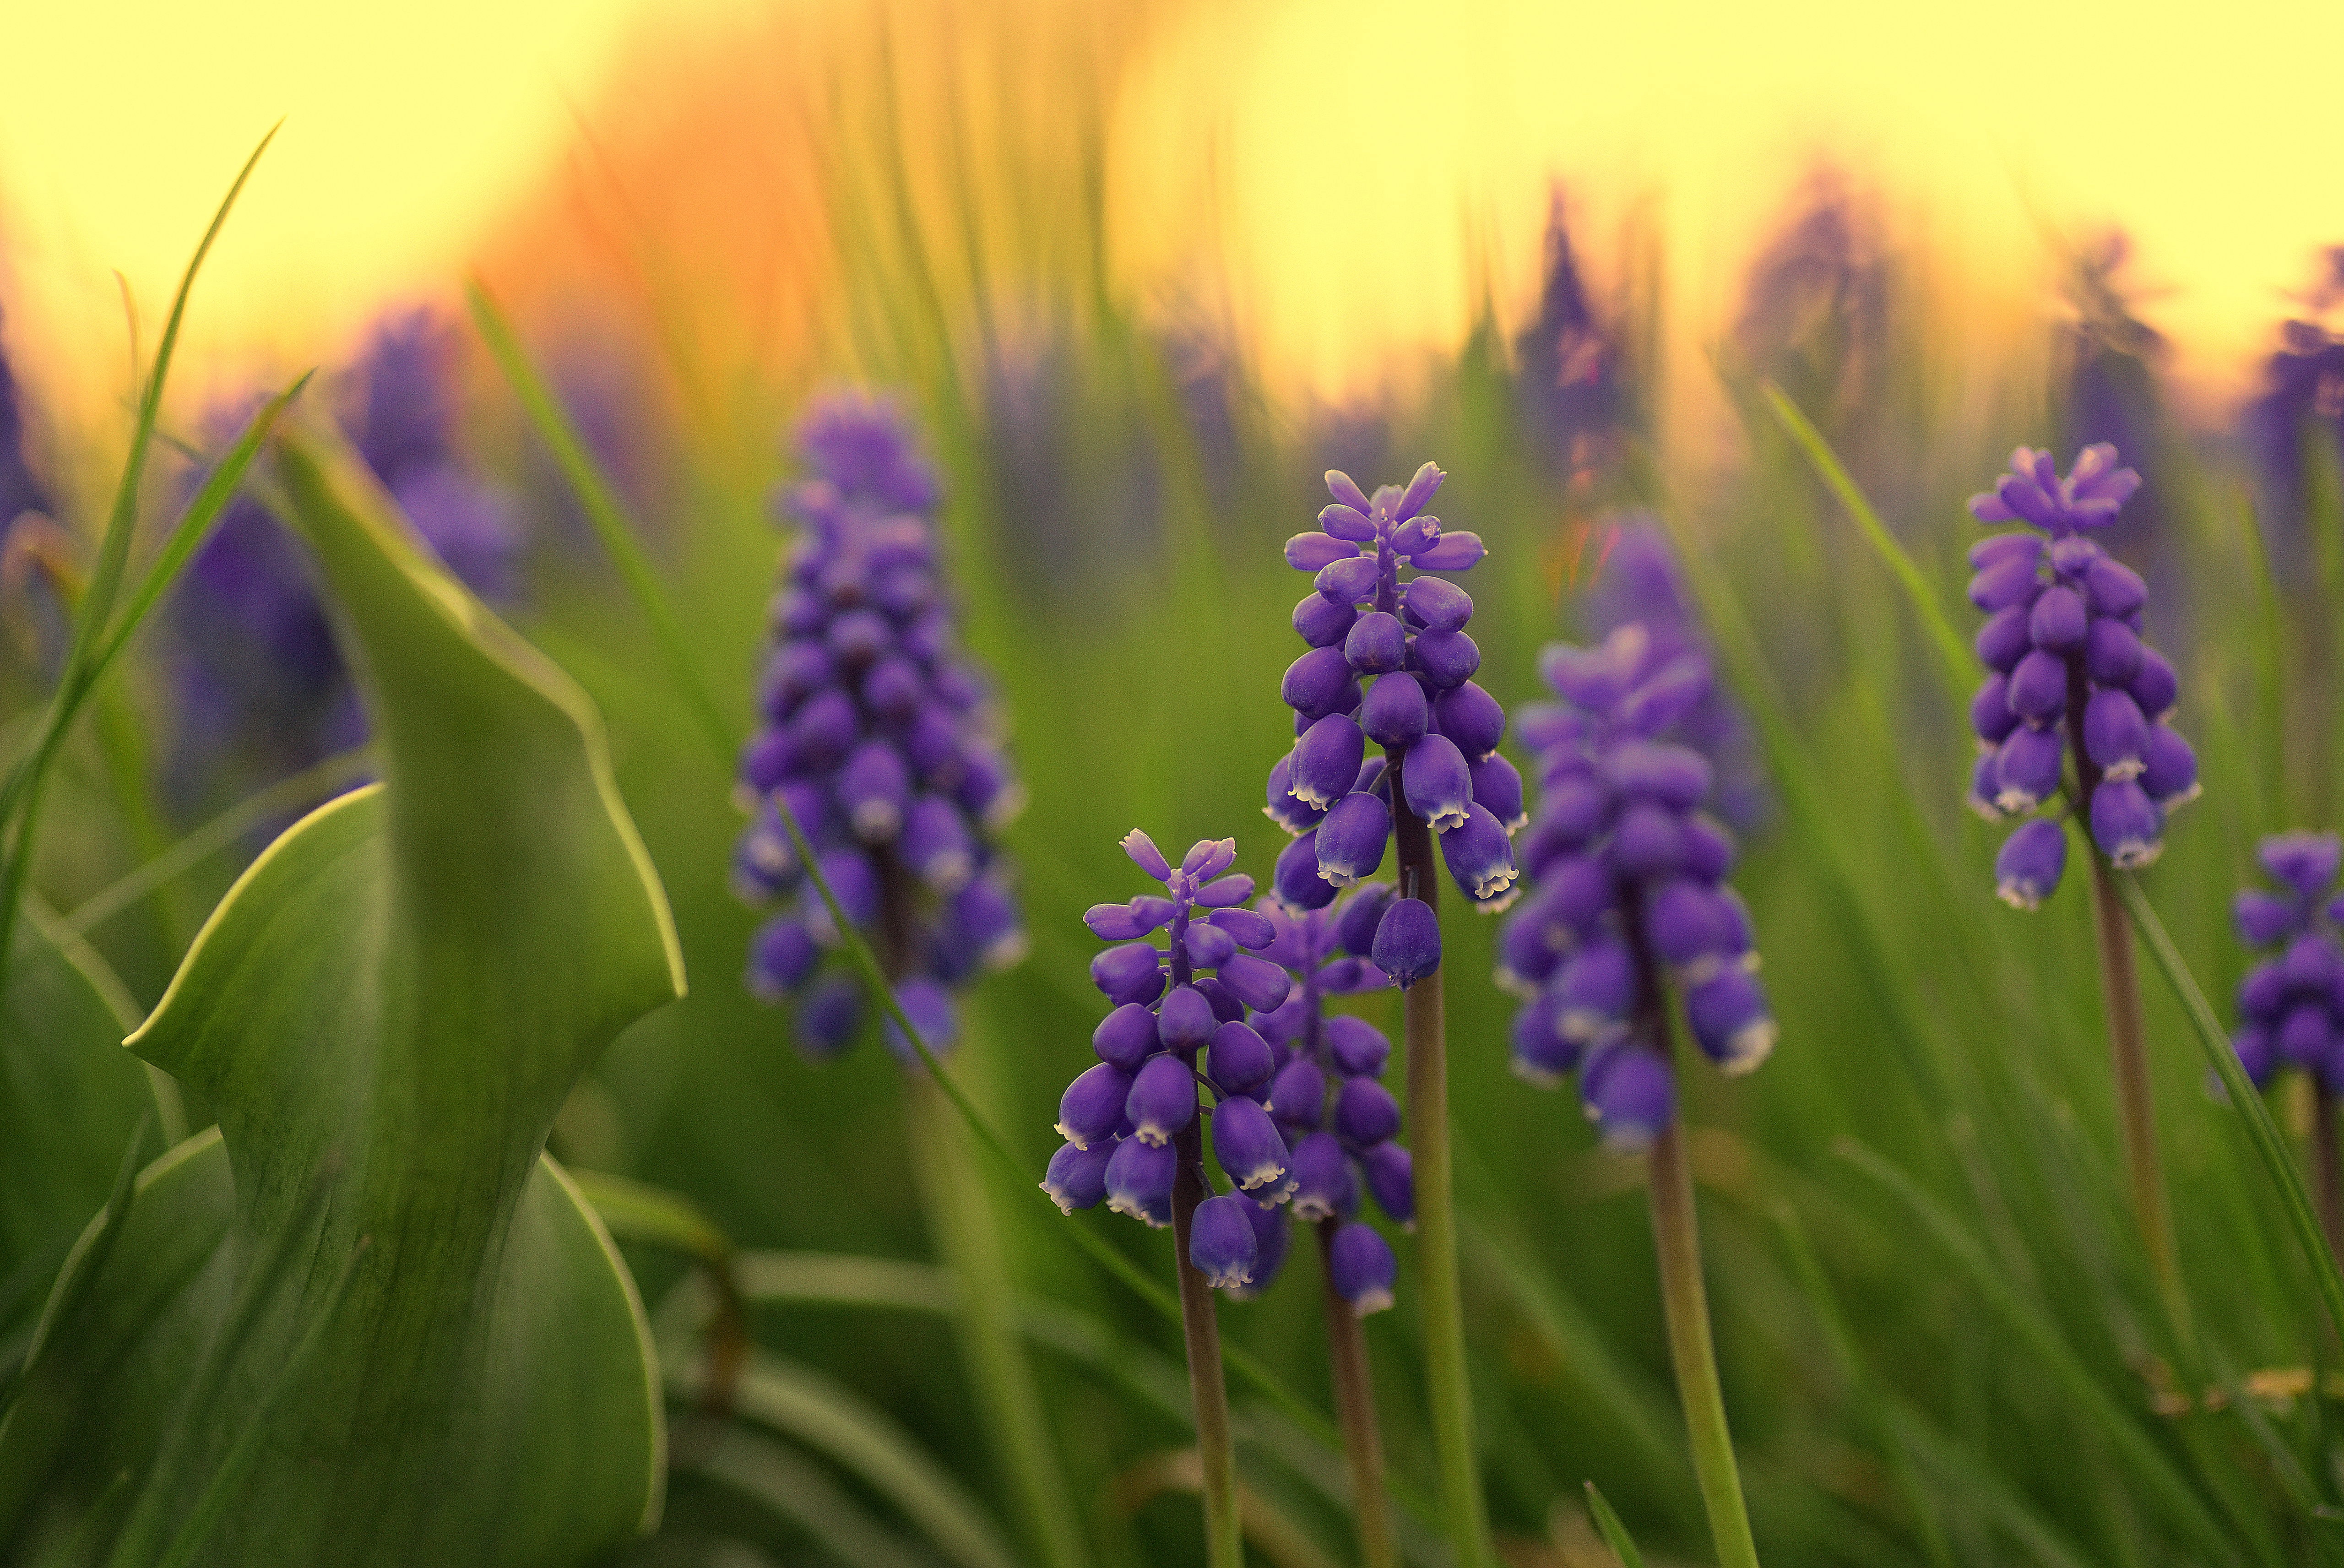 Purple Hyacinth Images, HD Pictures For Free Vectors Download - Lovepik.com